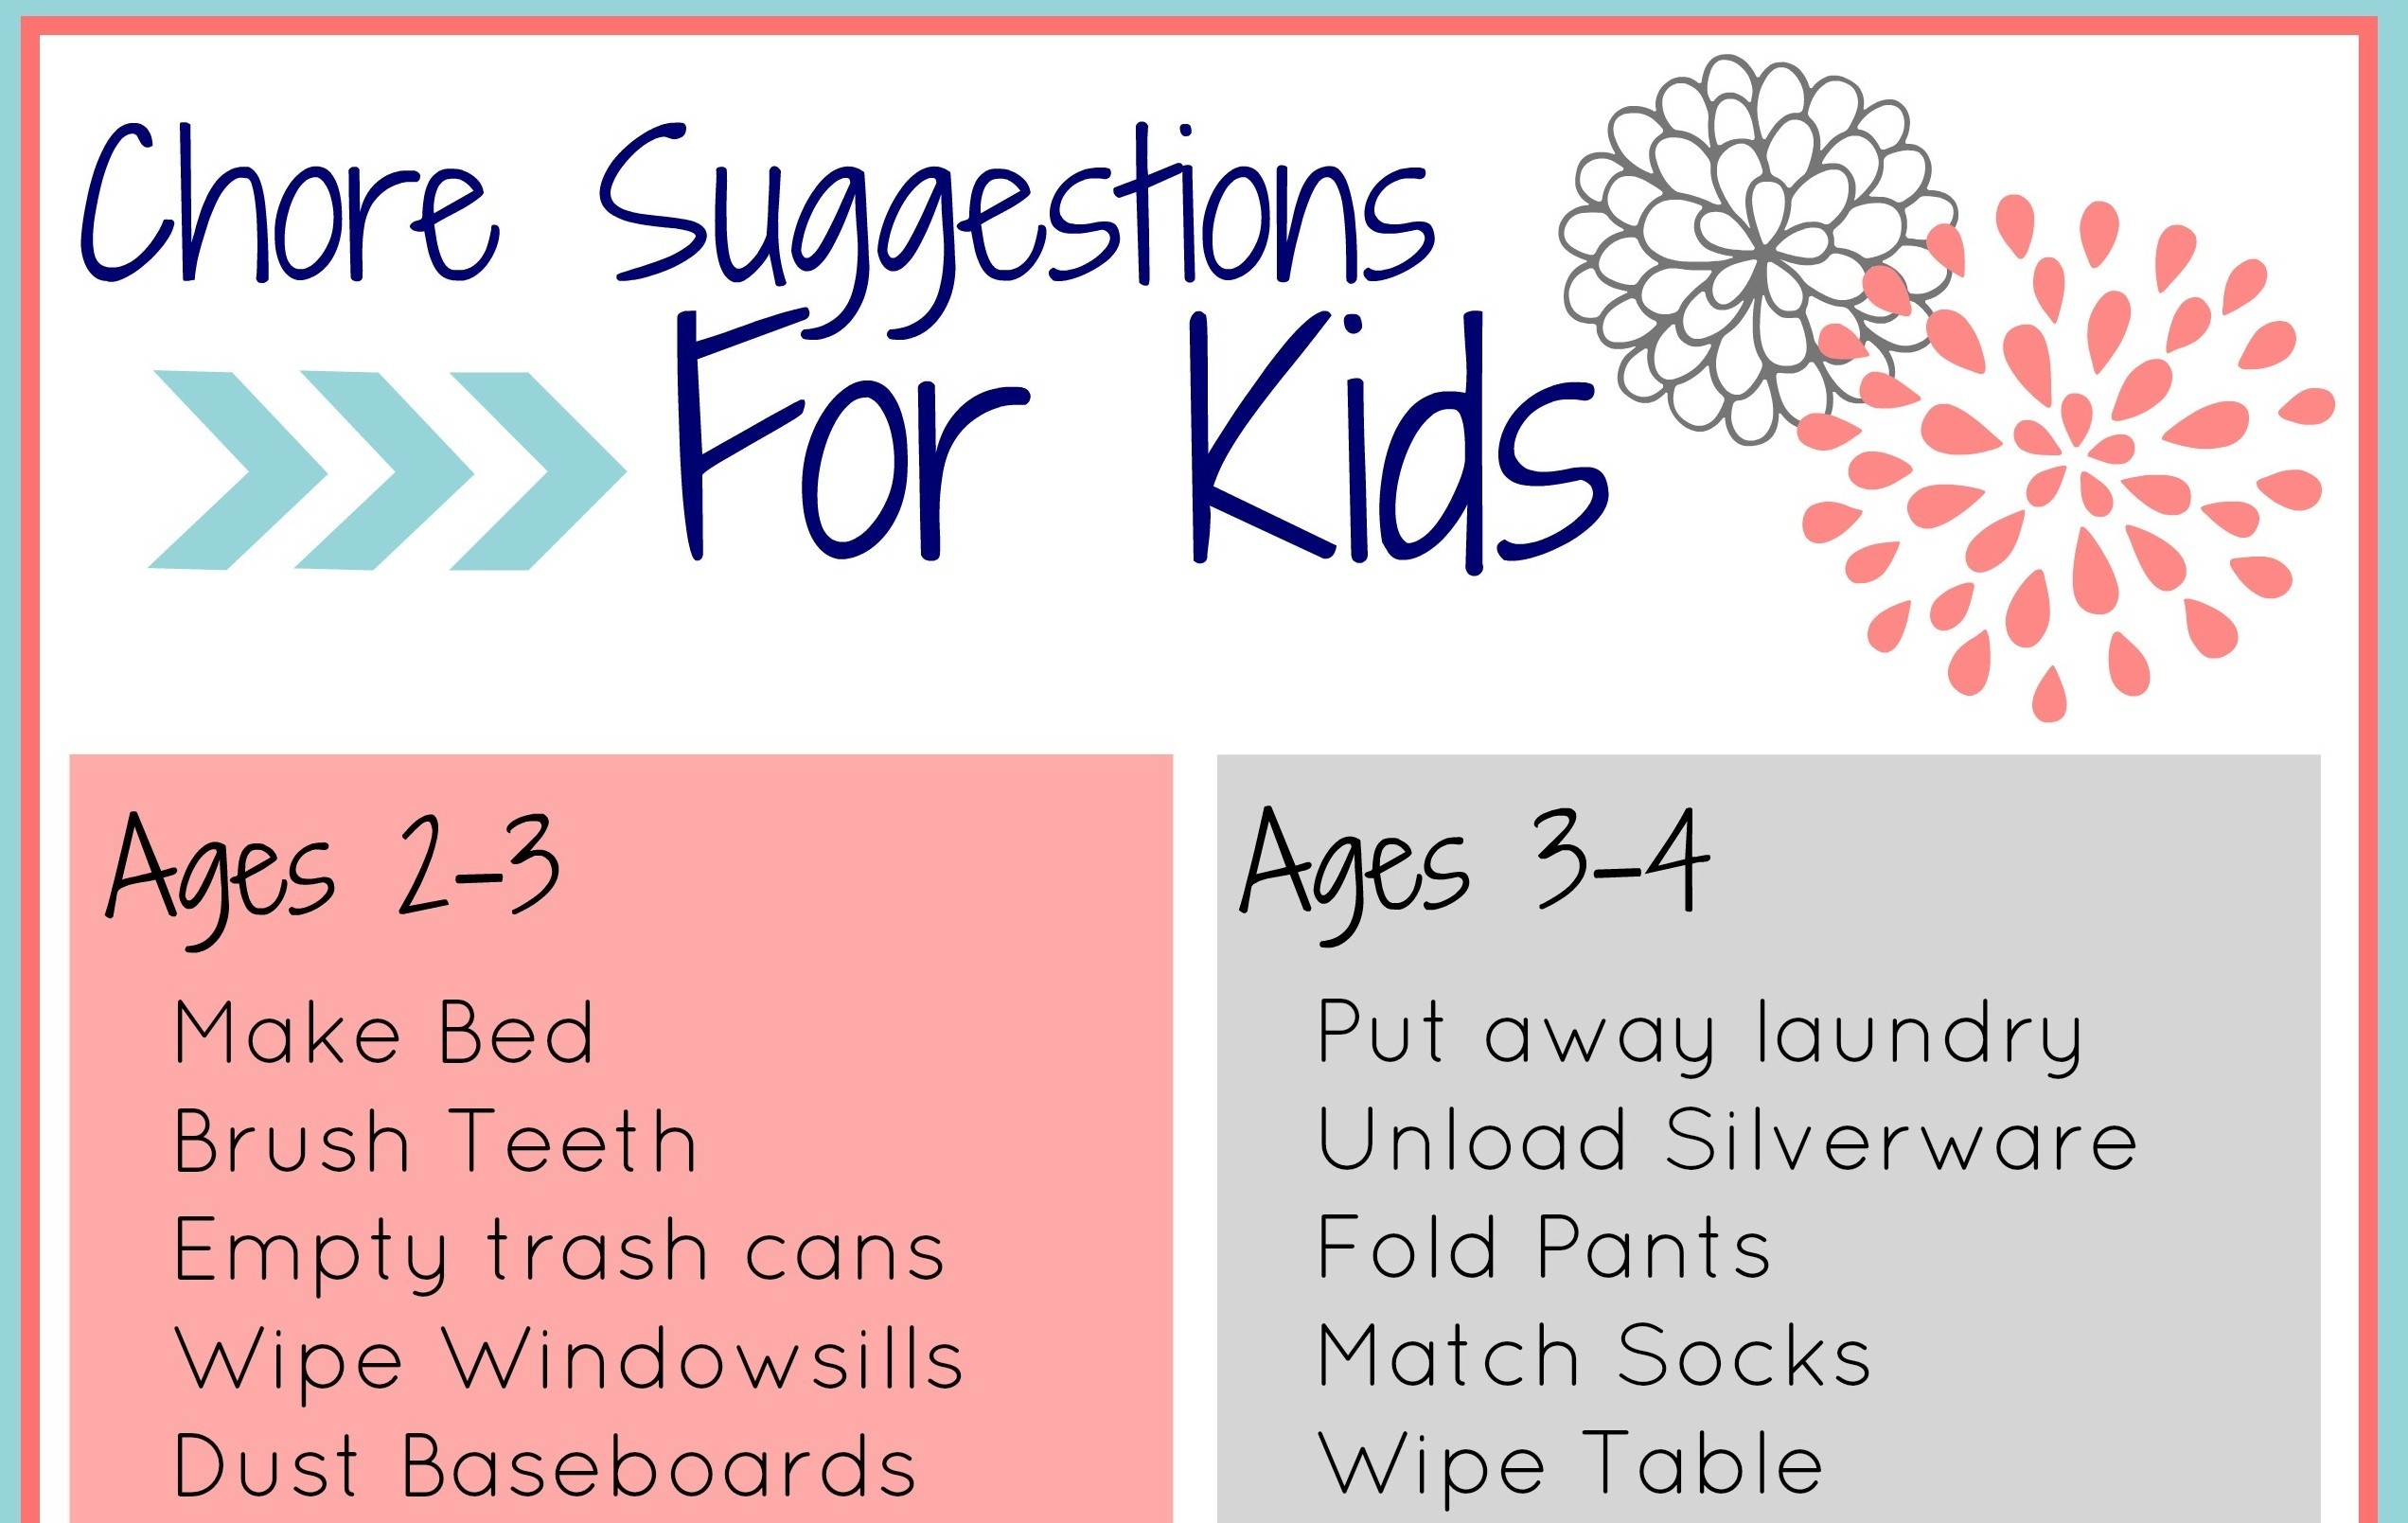 FREE Printable Chore Charts For Kids The Little Years - Free Printable Chore Charts For Kids With Pictures